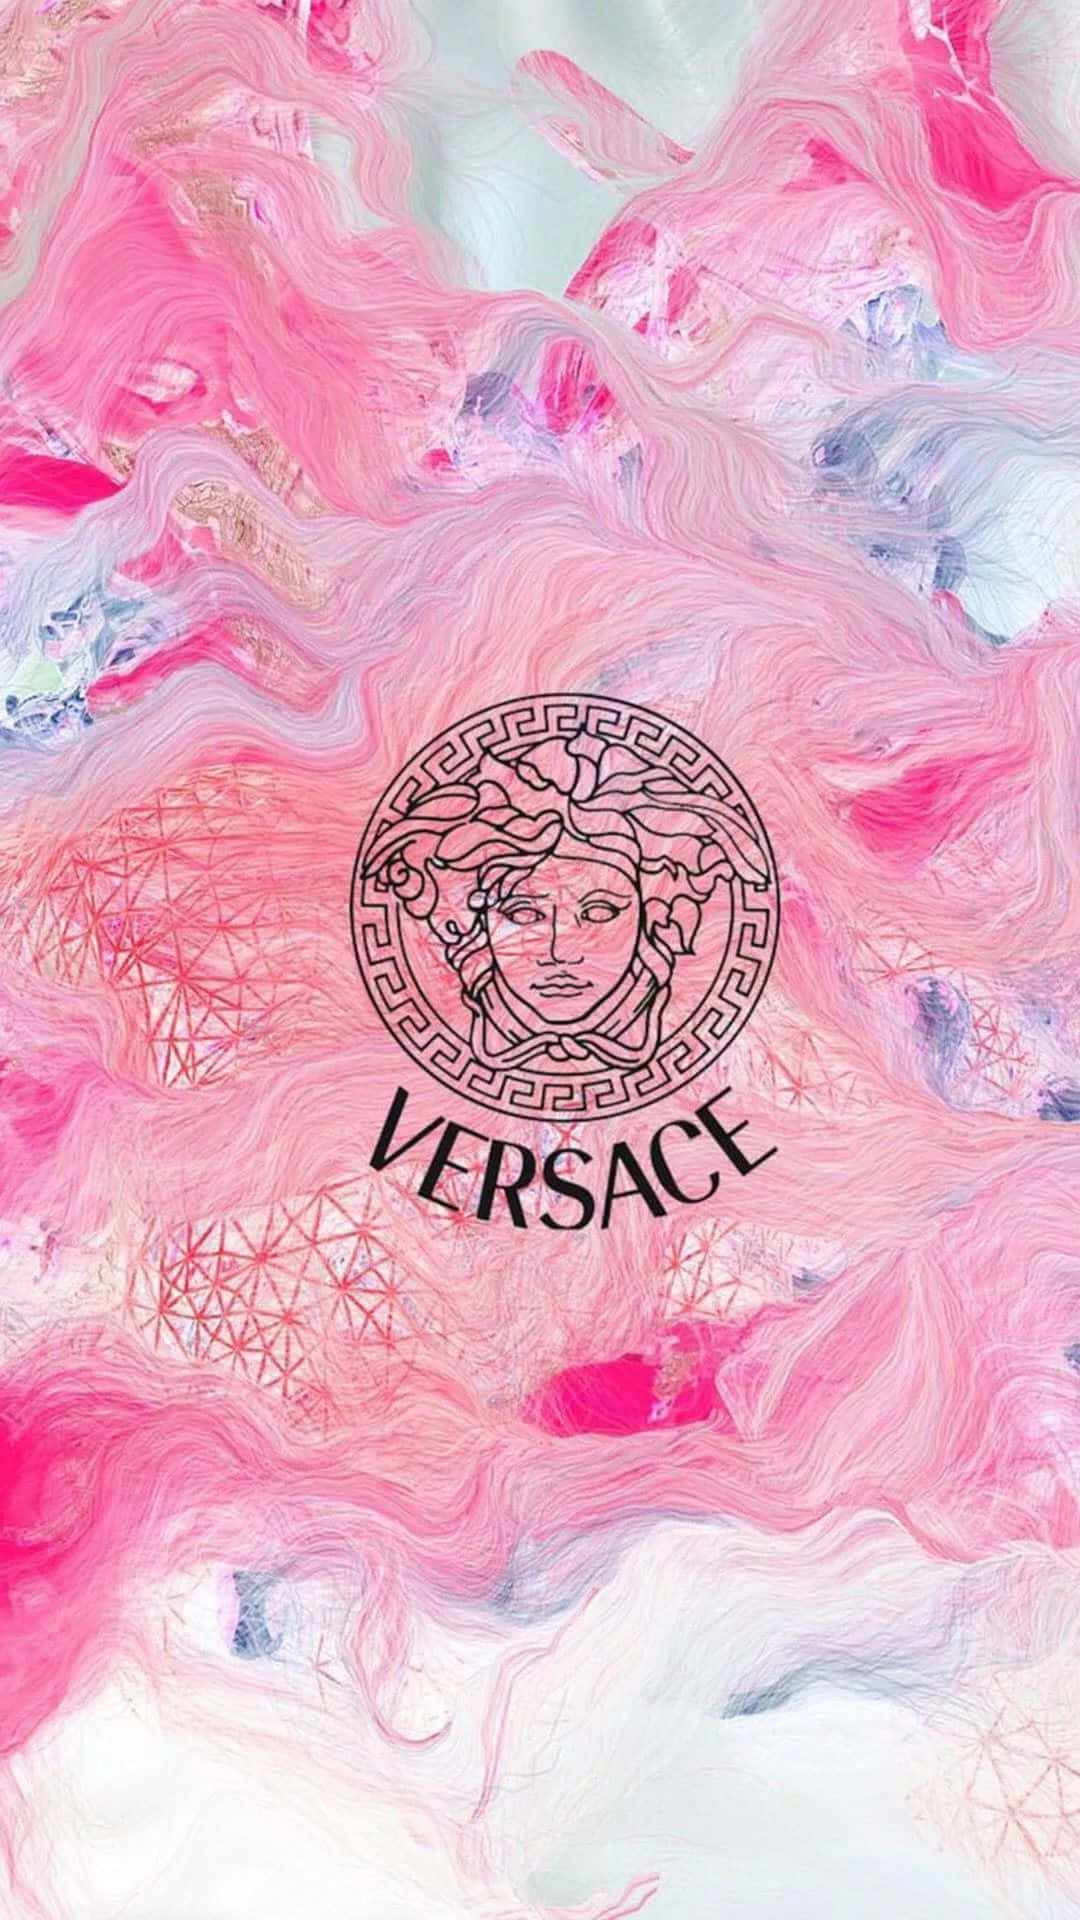 Image Stylish And Luxurious Versace Iphone Wallpaper